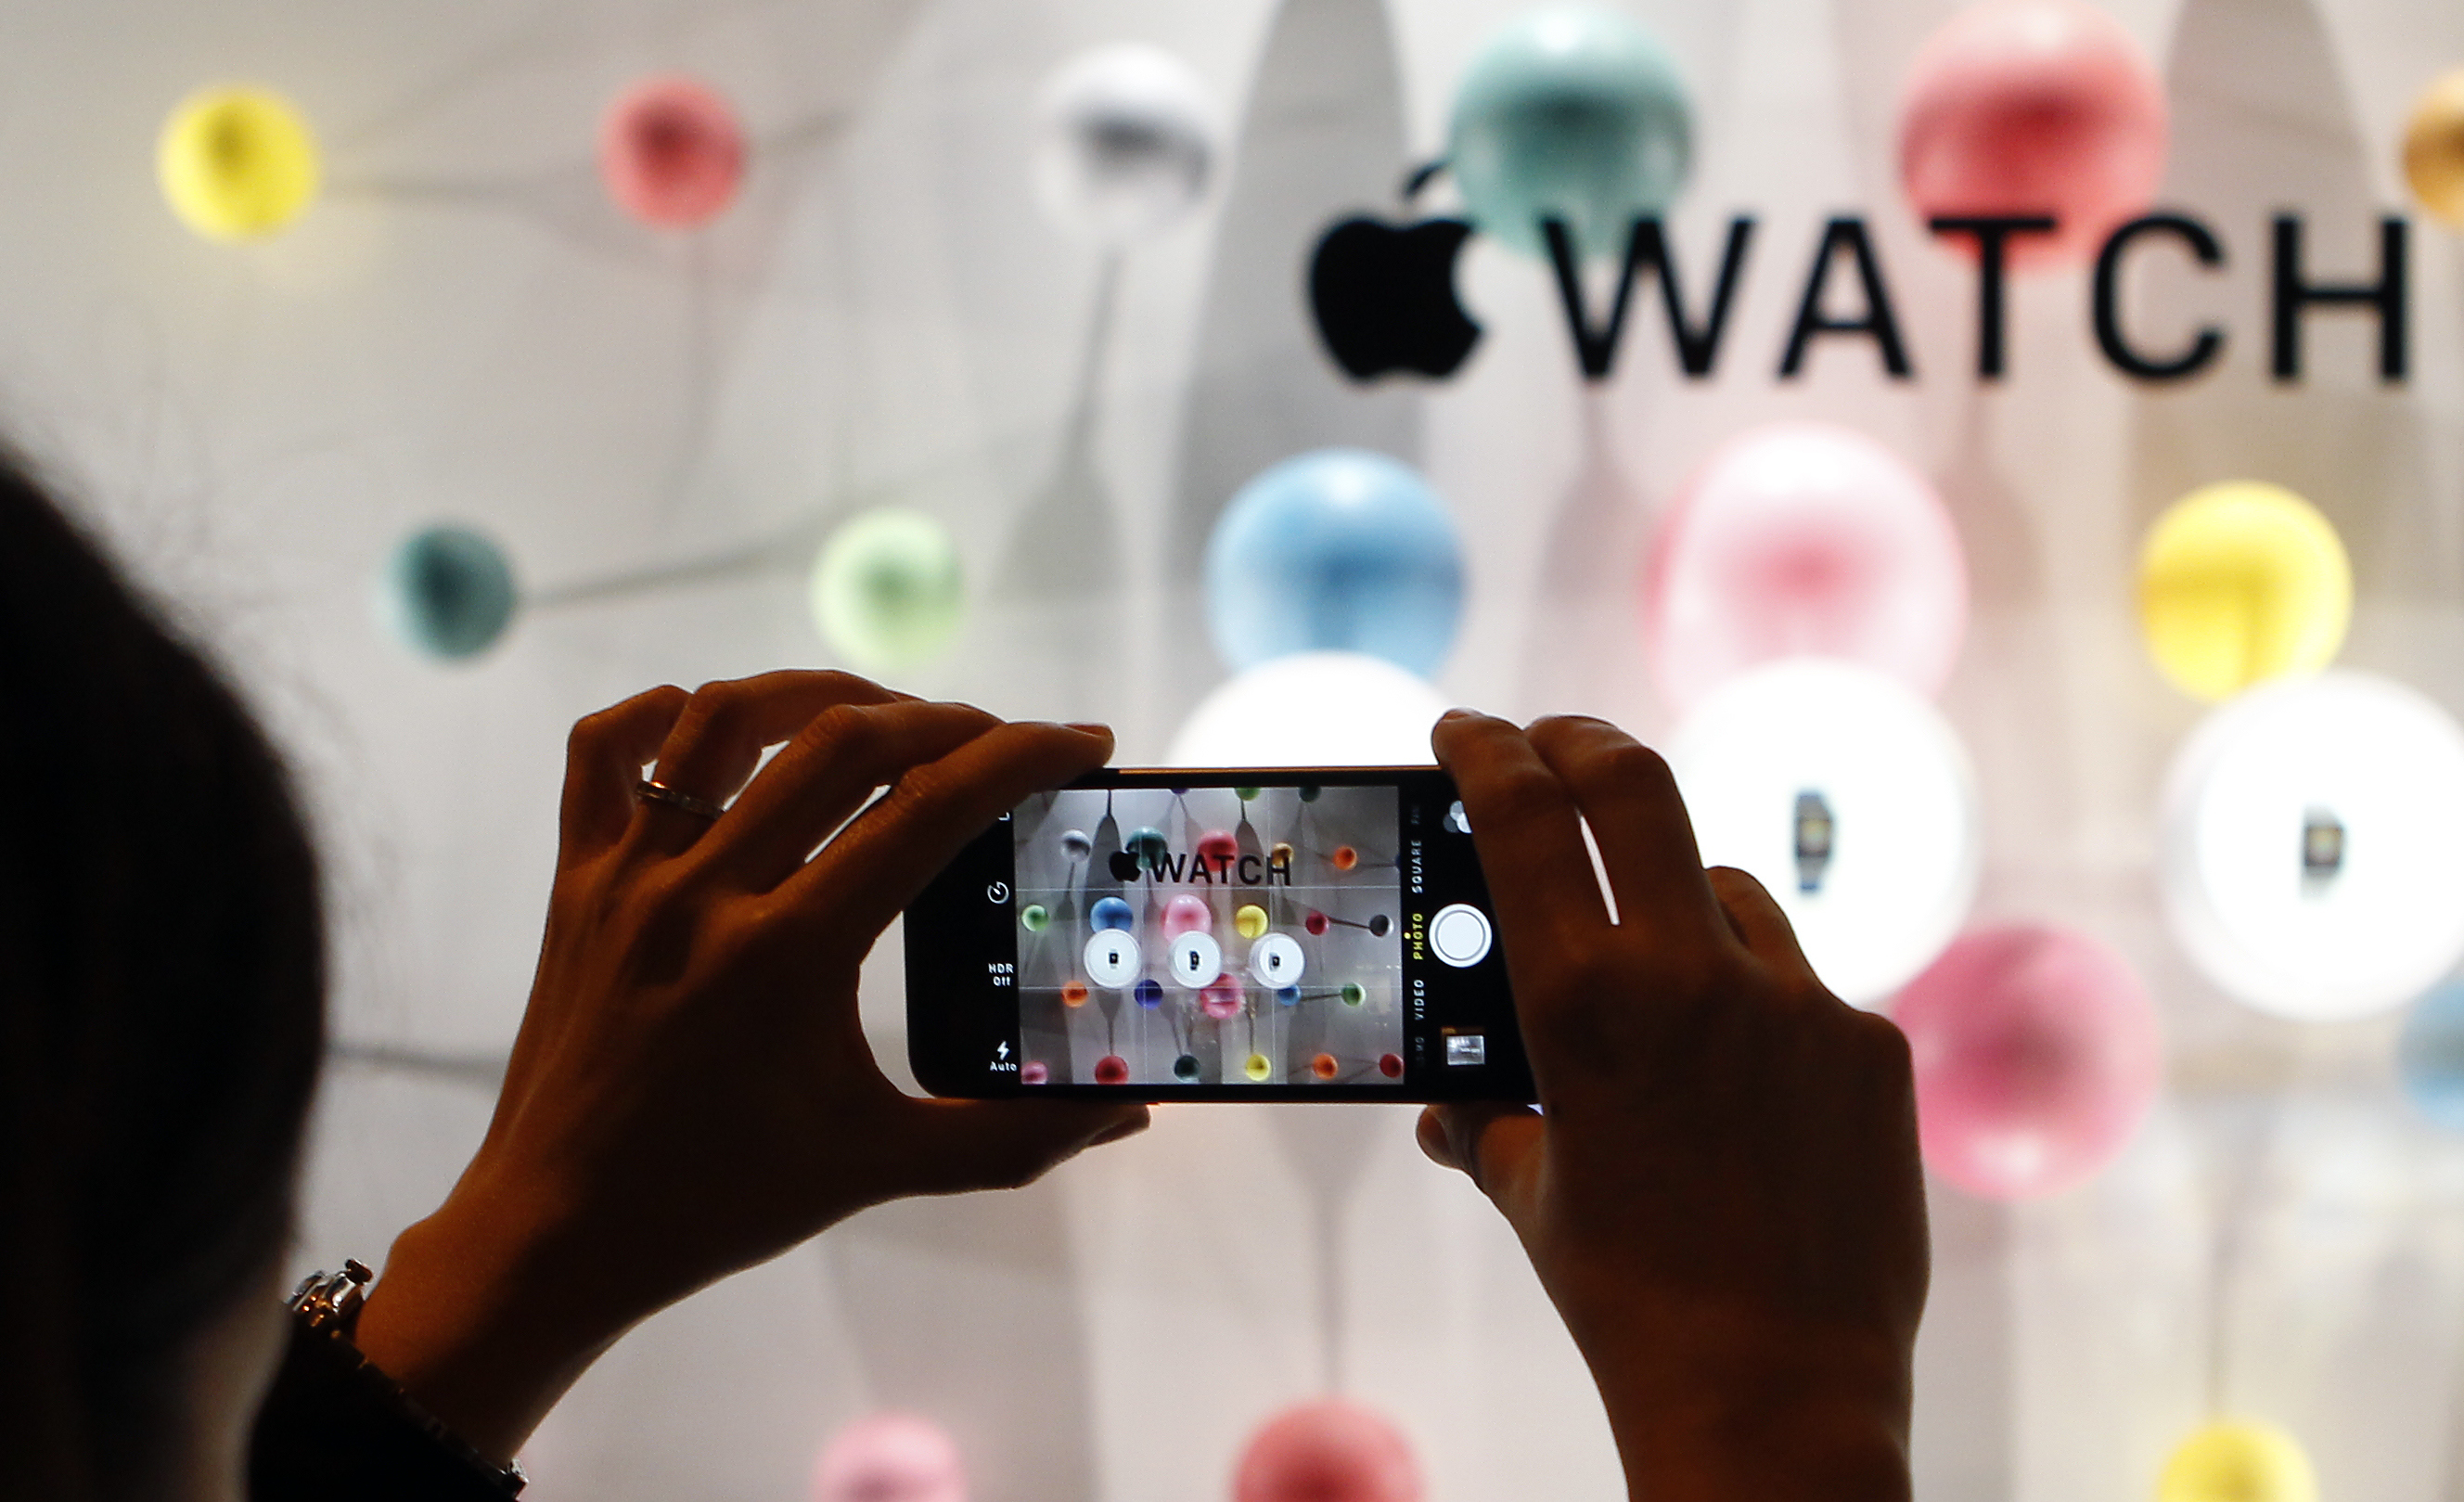 A woman takes a picture during the new Apple Watch display during an Apple special event at Colette store on September 30, 2014 in Paris, France. (Chesnot&mdash;Getty Images)